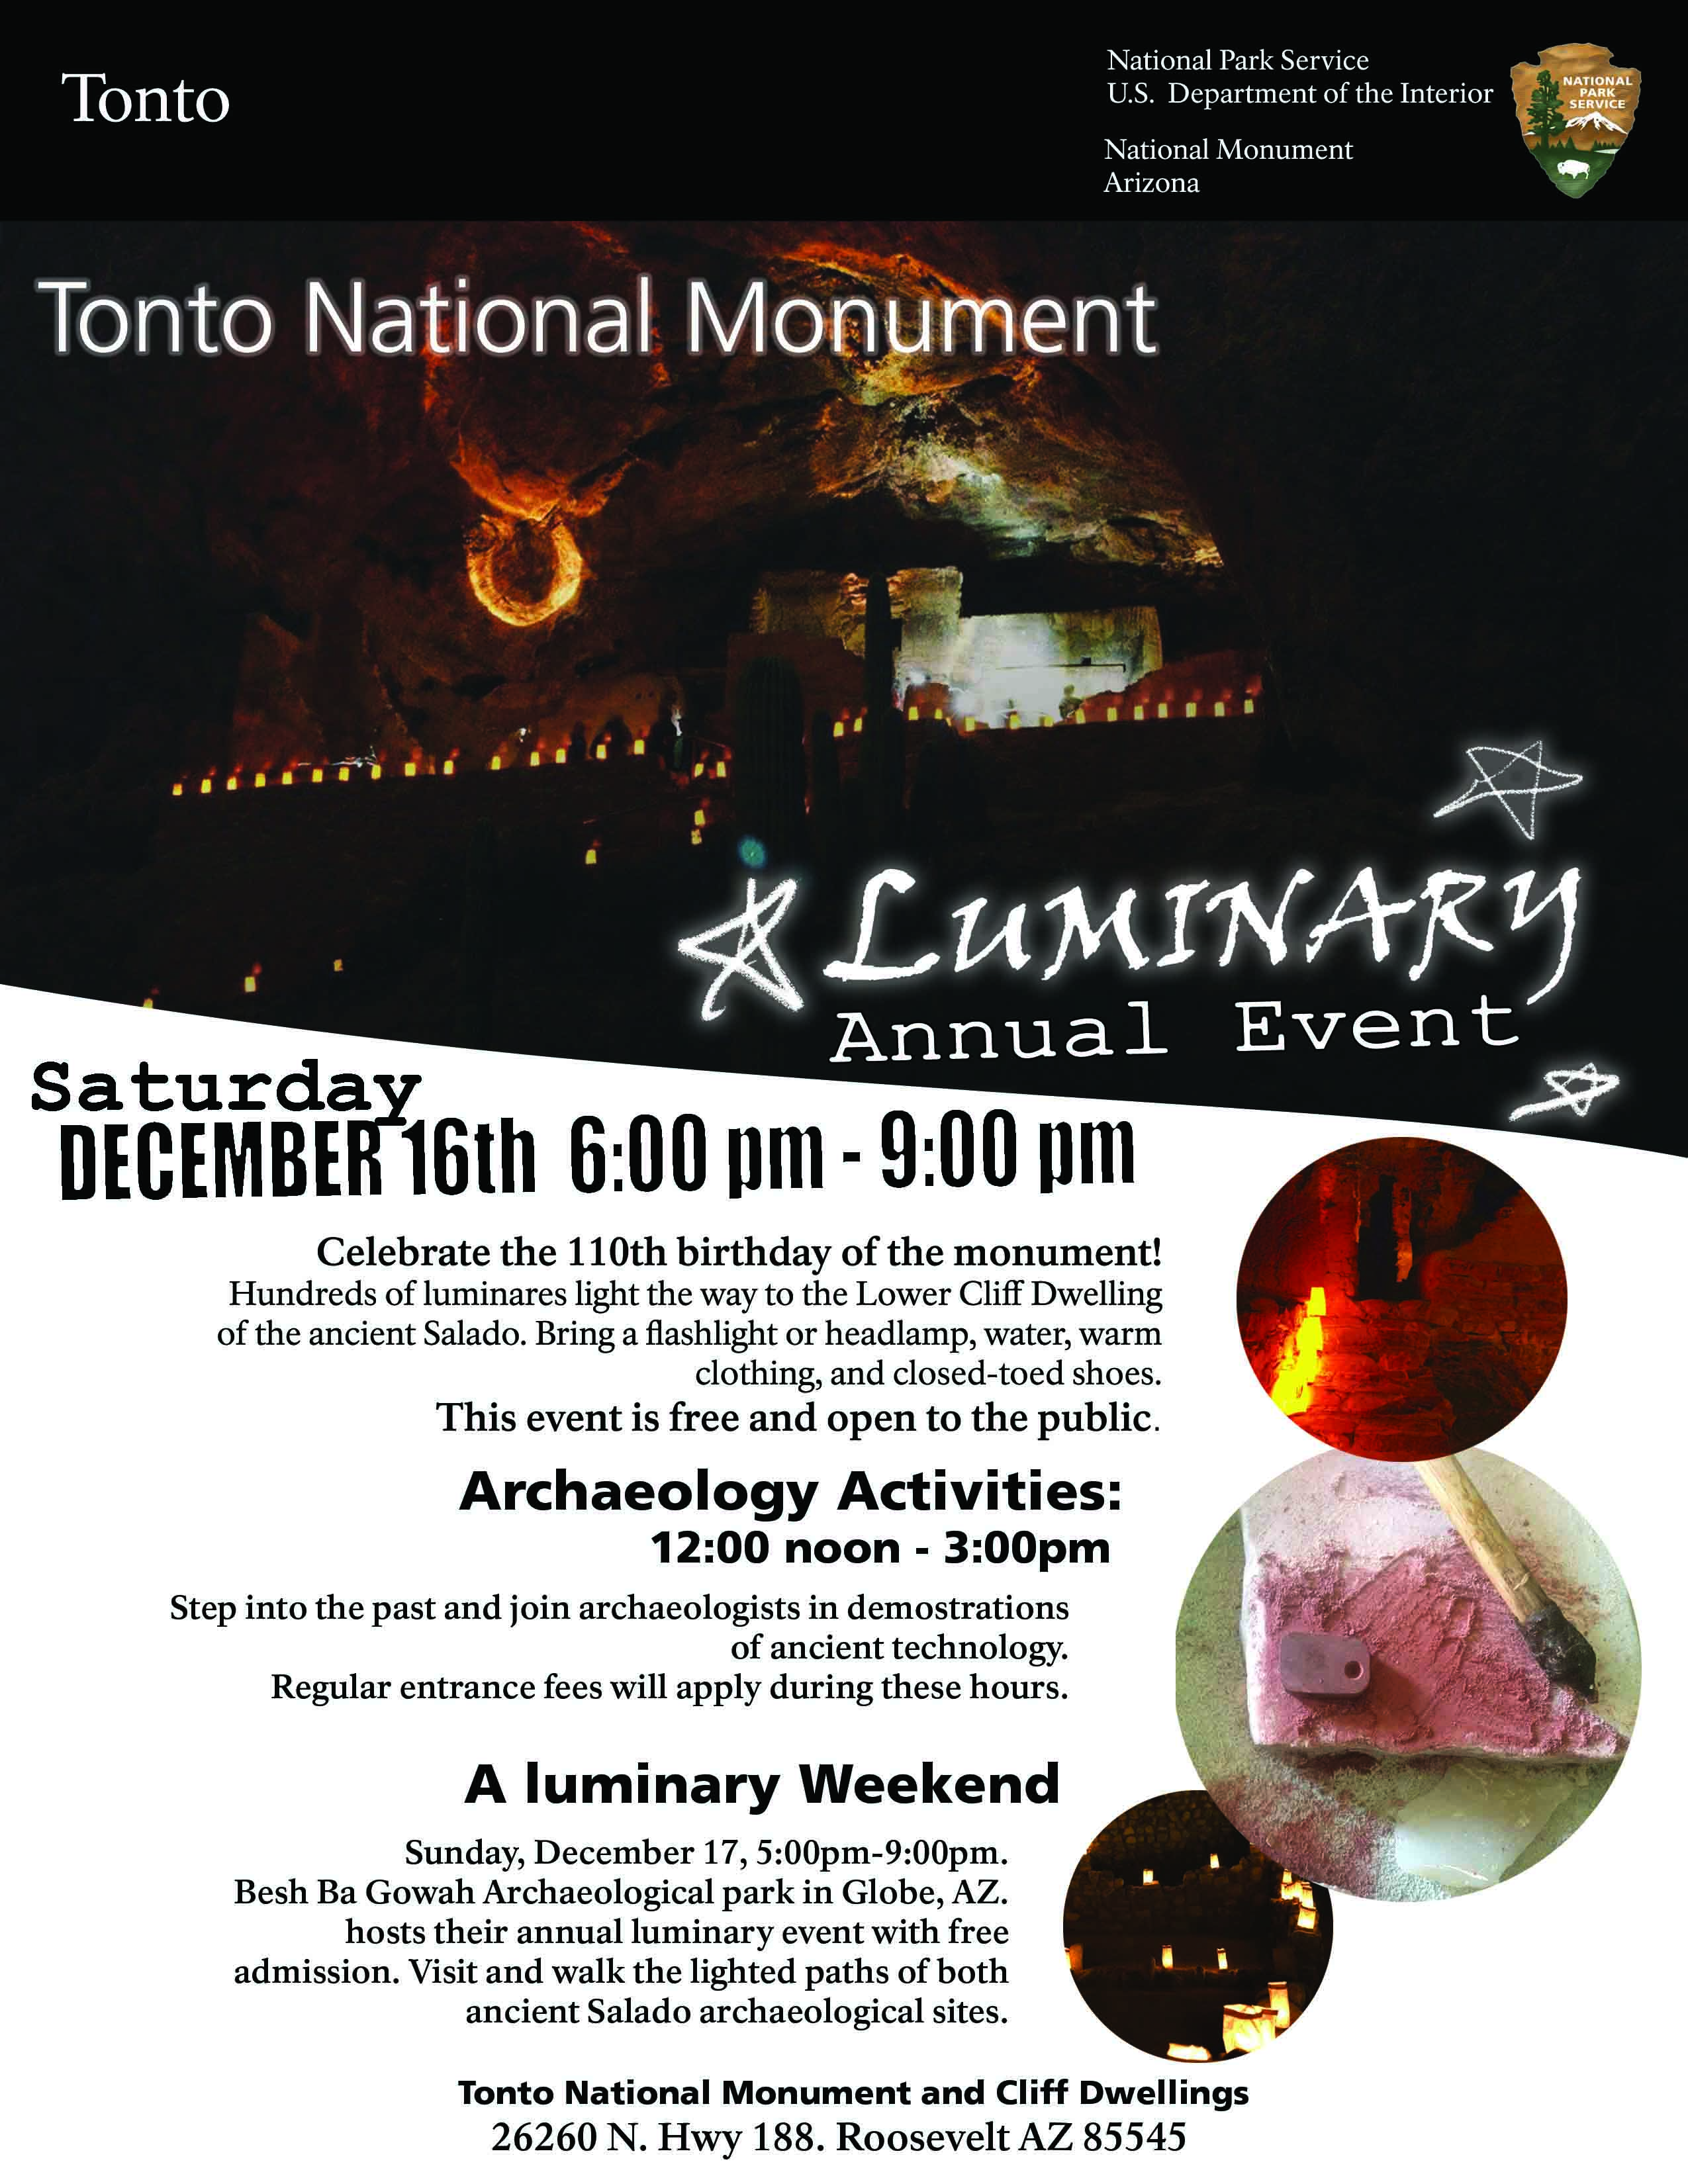 Cliff dwelling with luminaries, flyer for event